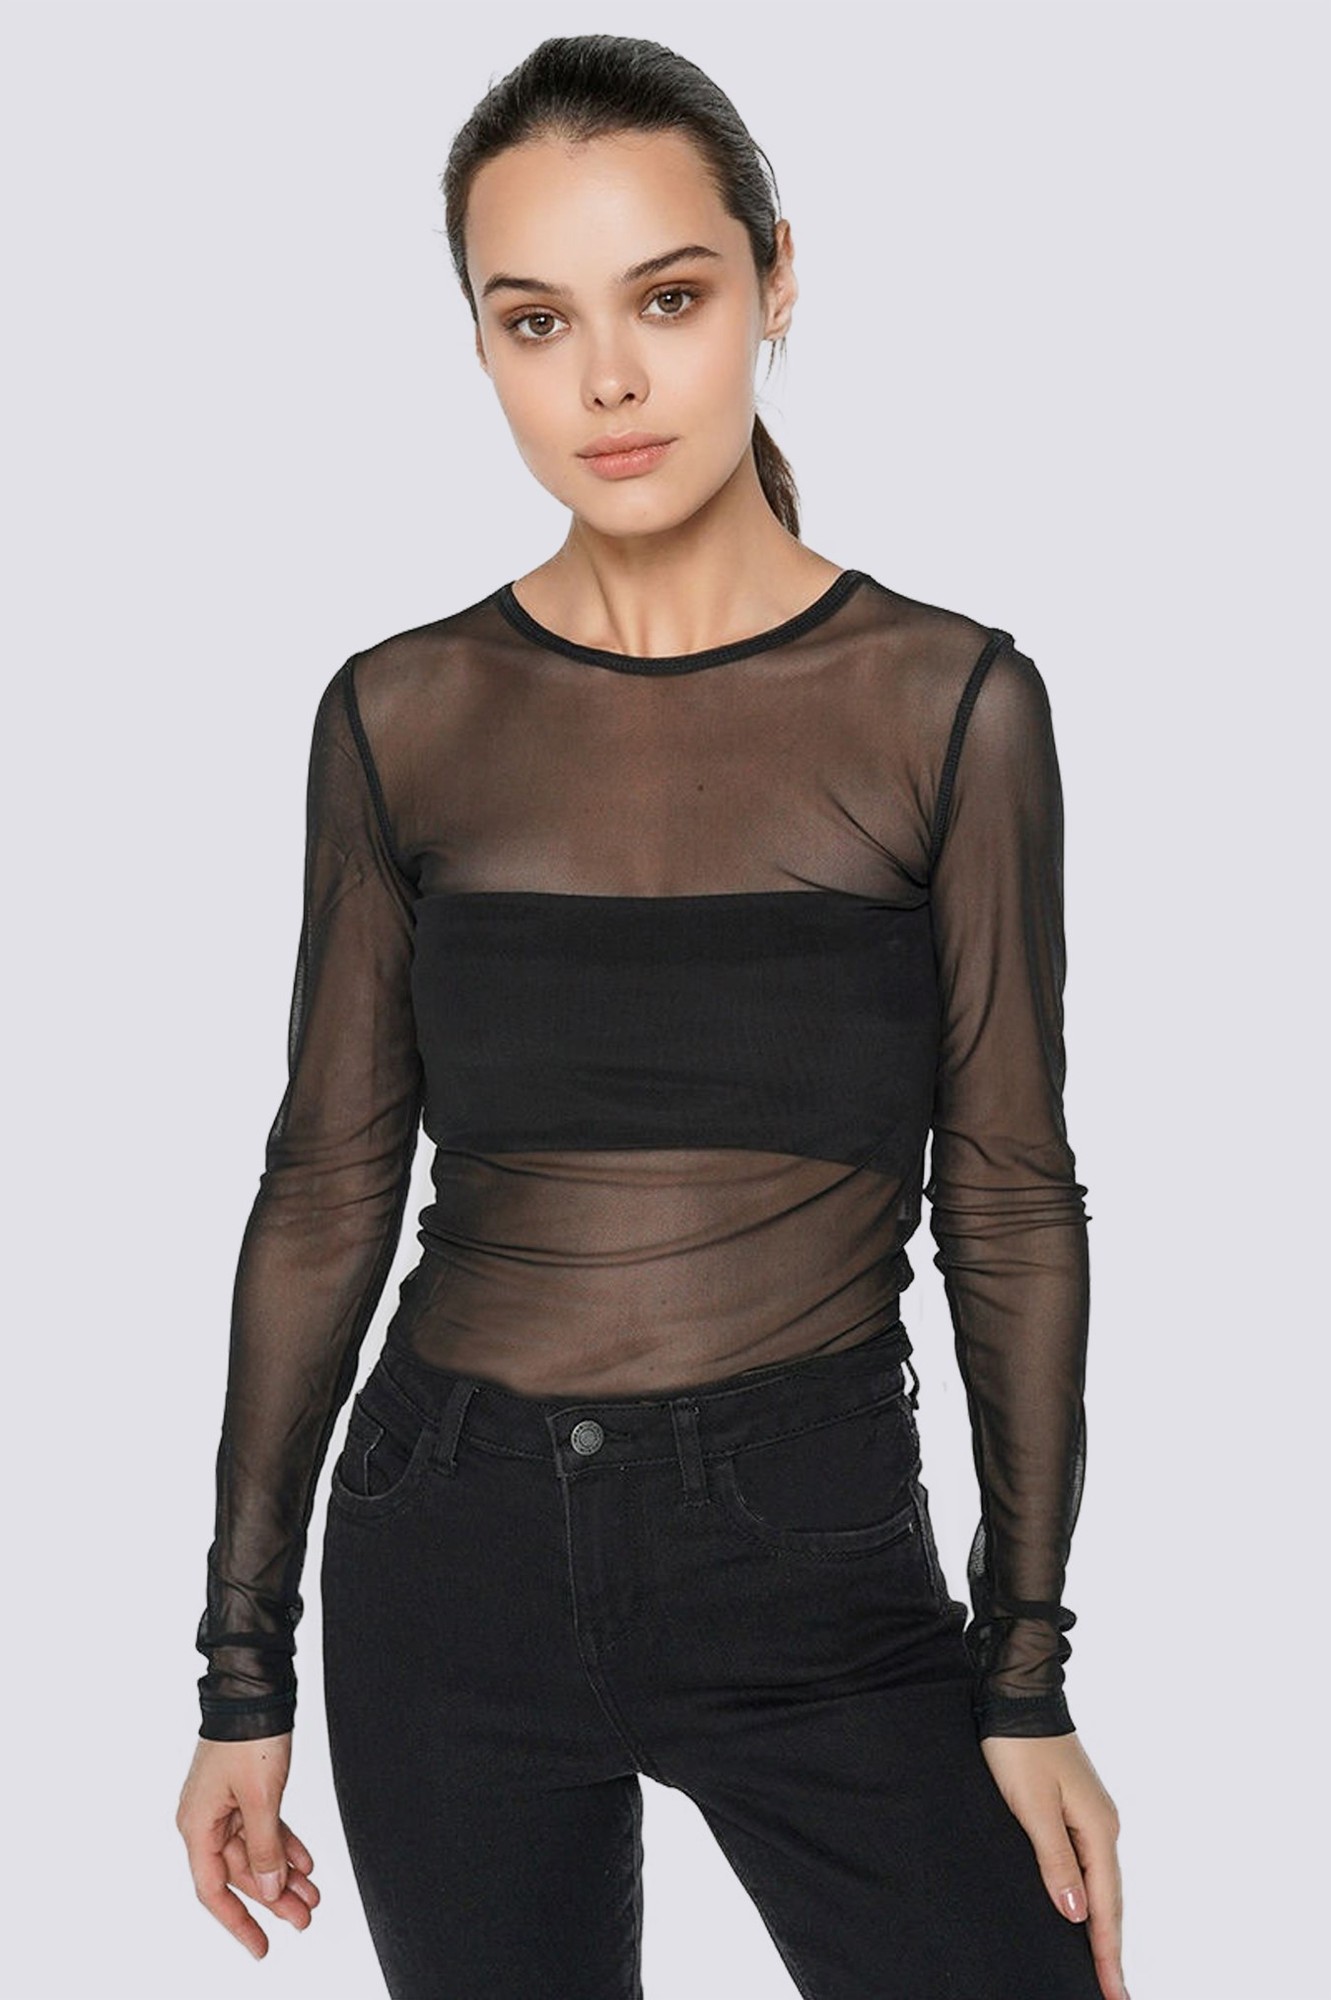 Long sleeve mesh - 25350 from EGOStyle design with donate to u24